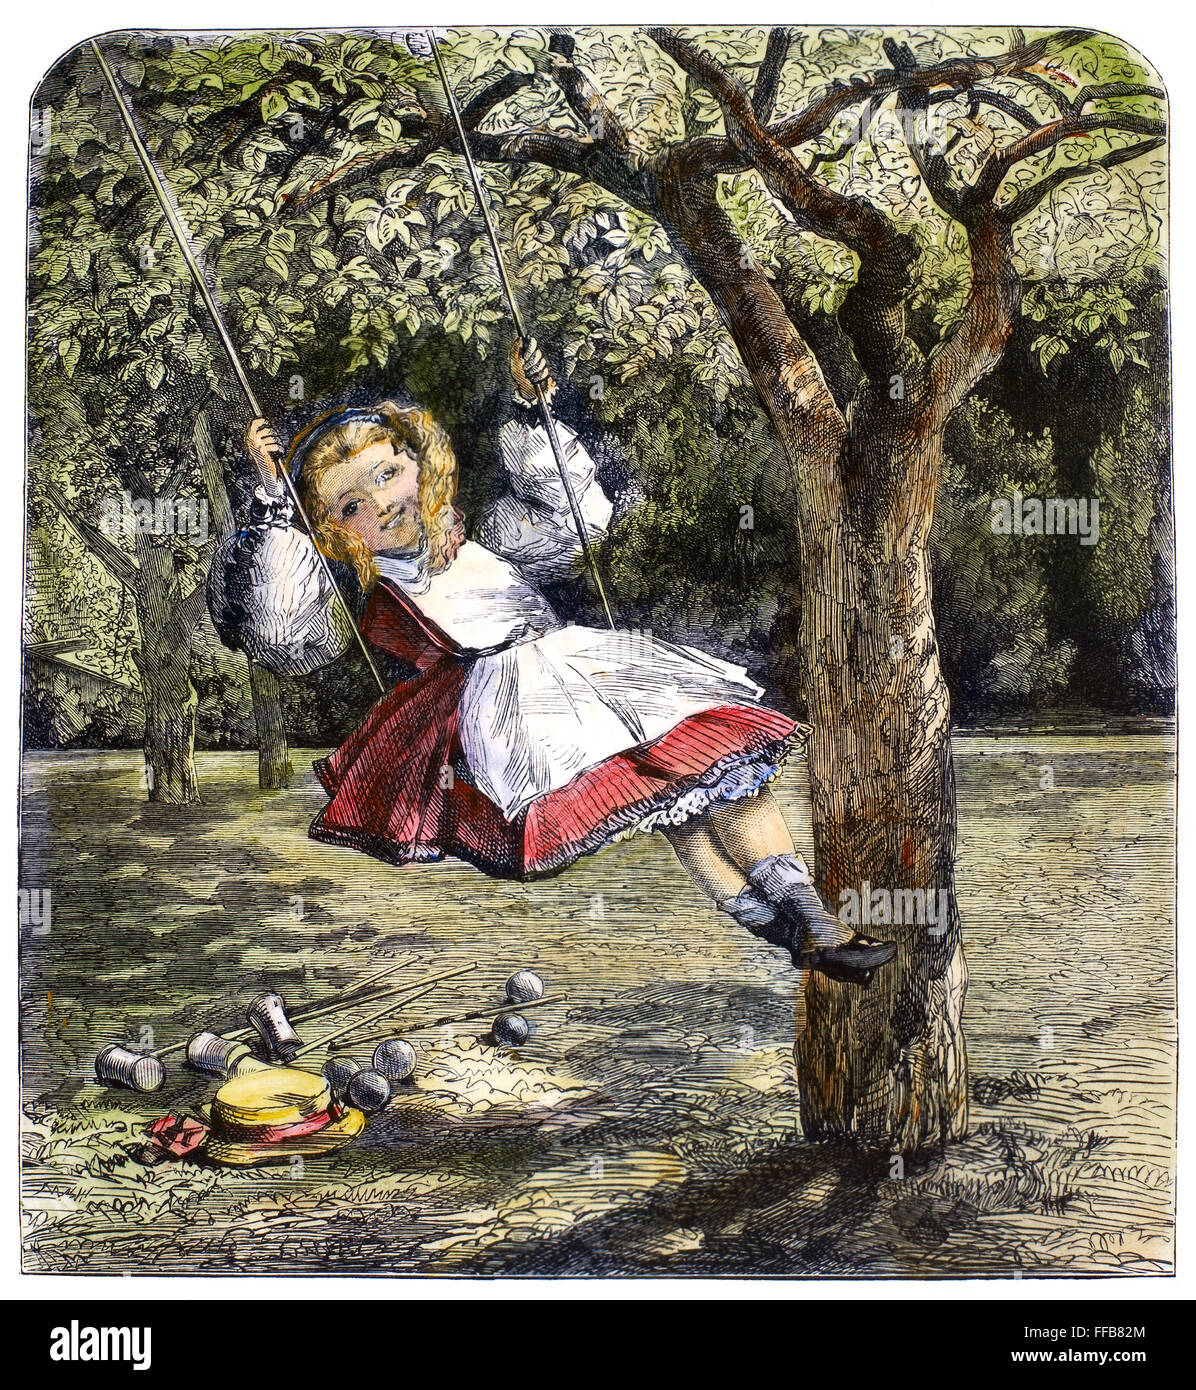 THOMAS: THE SWING, 1864. /nWood engraving, English, 1864, after a painting by William Luson Thomas (1830-1900). Stock Photo